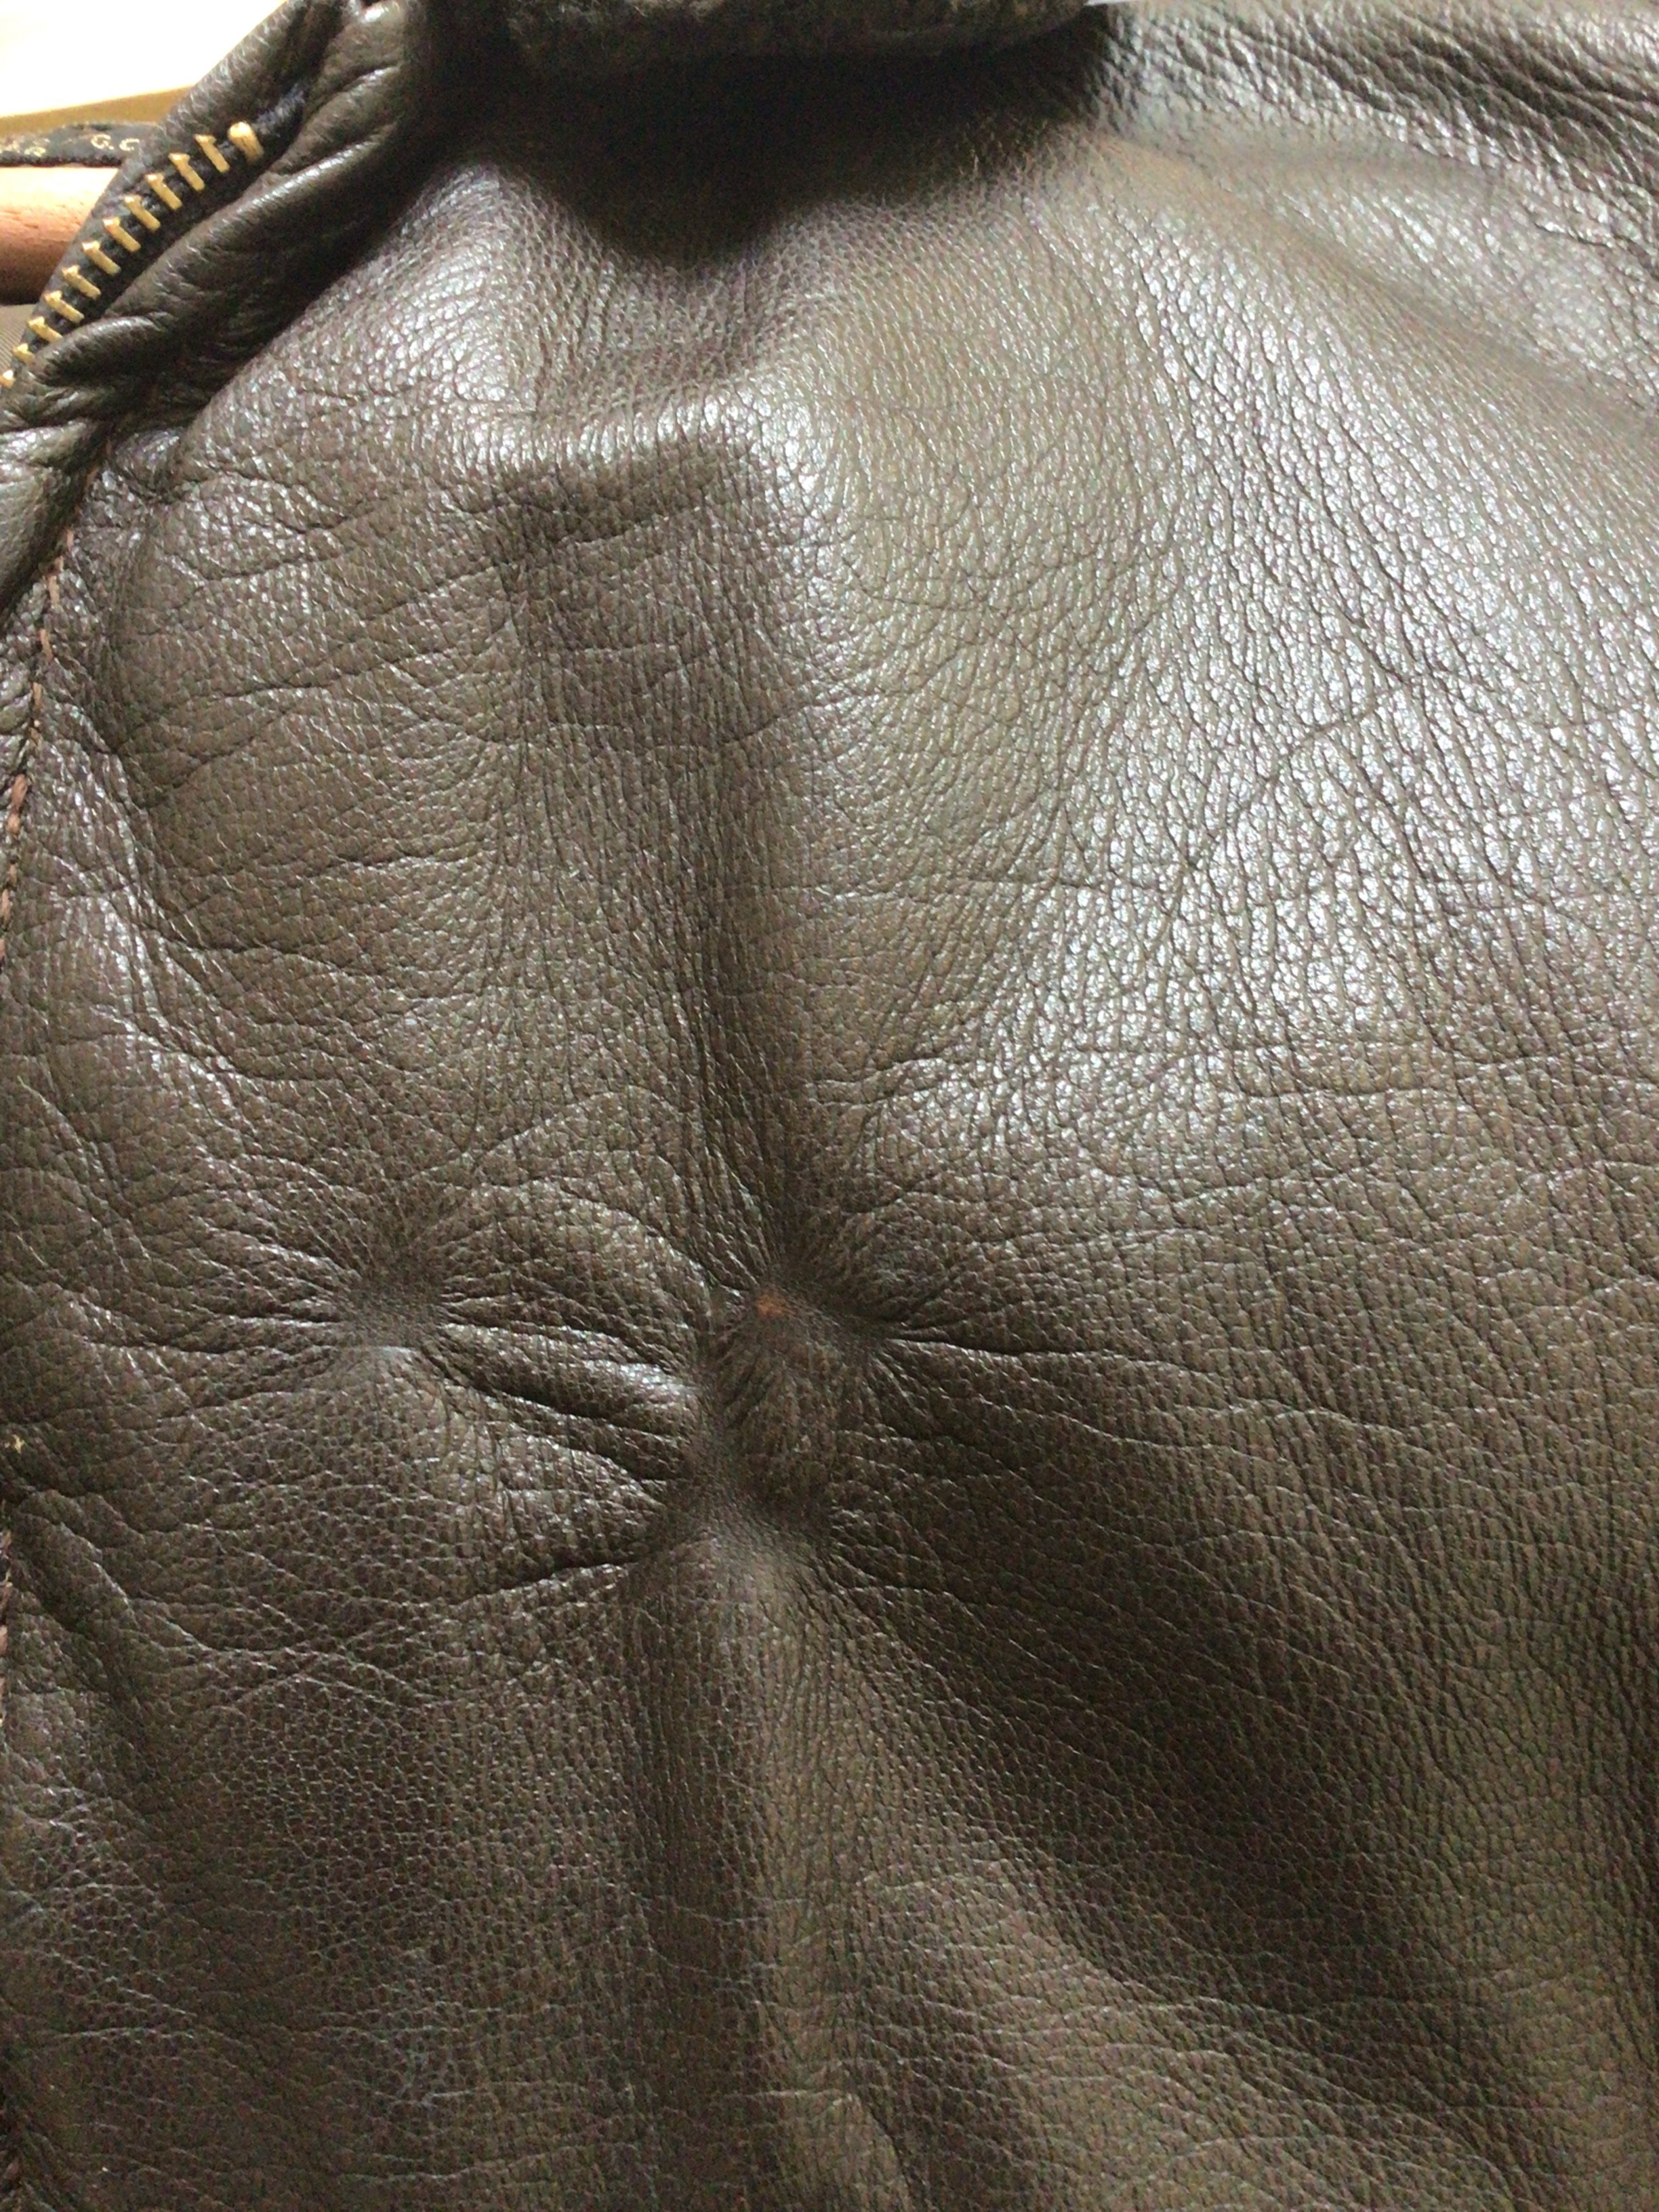 Cleaning a goat leather jacket? | The Fedora Lounge